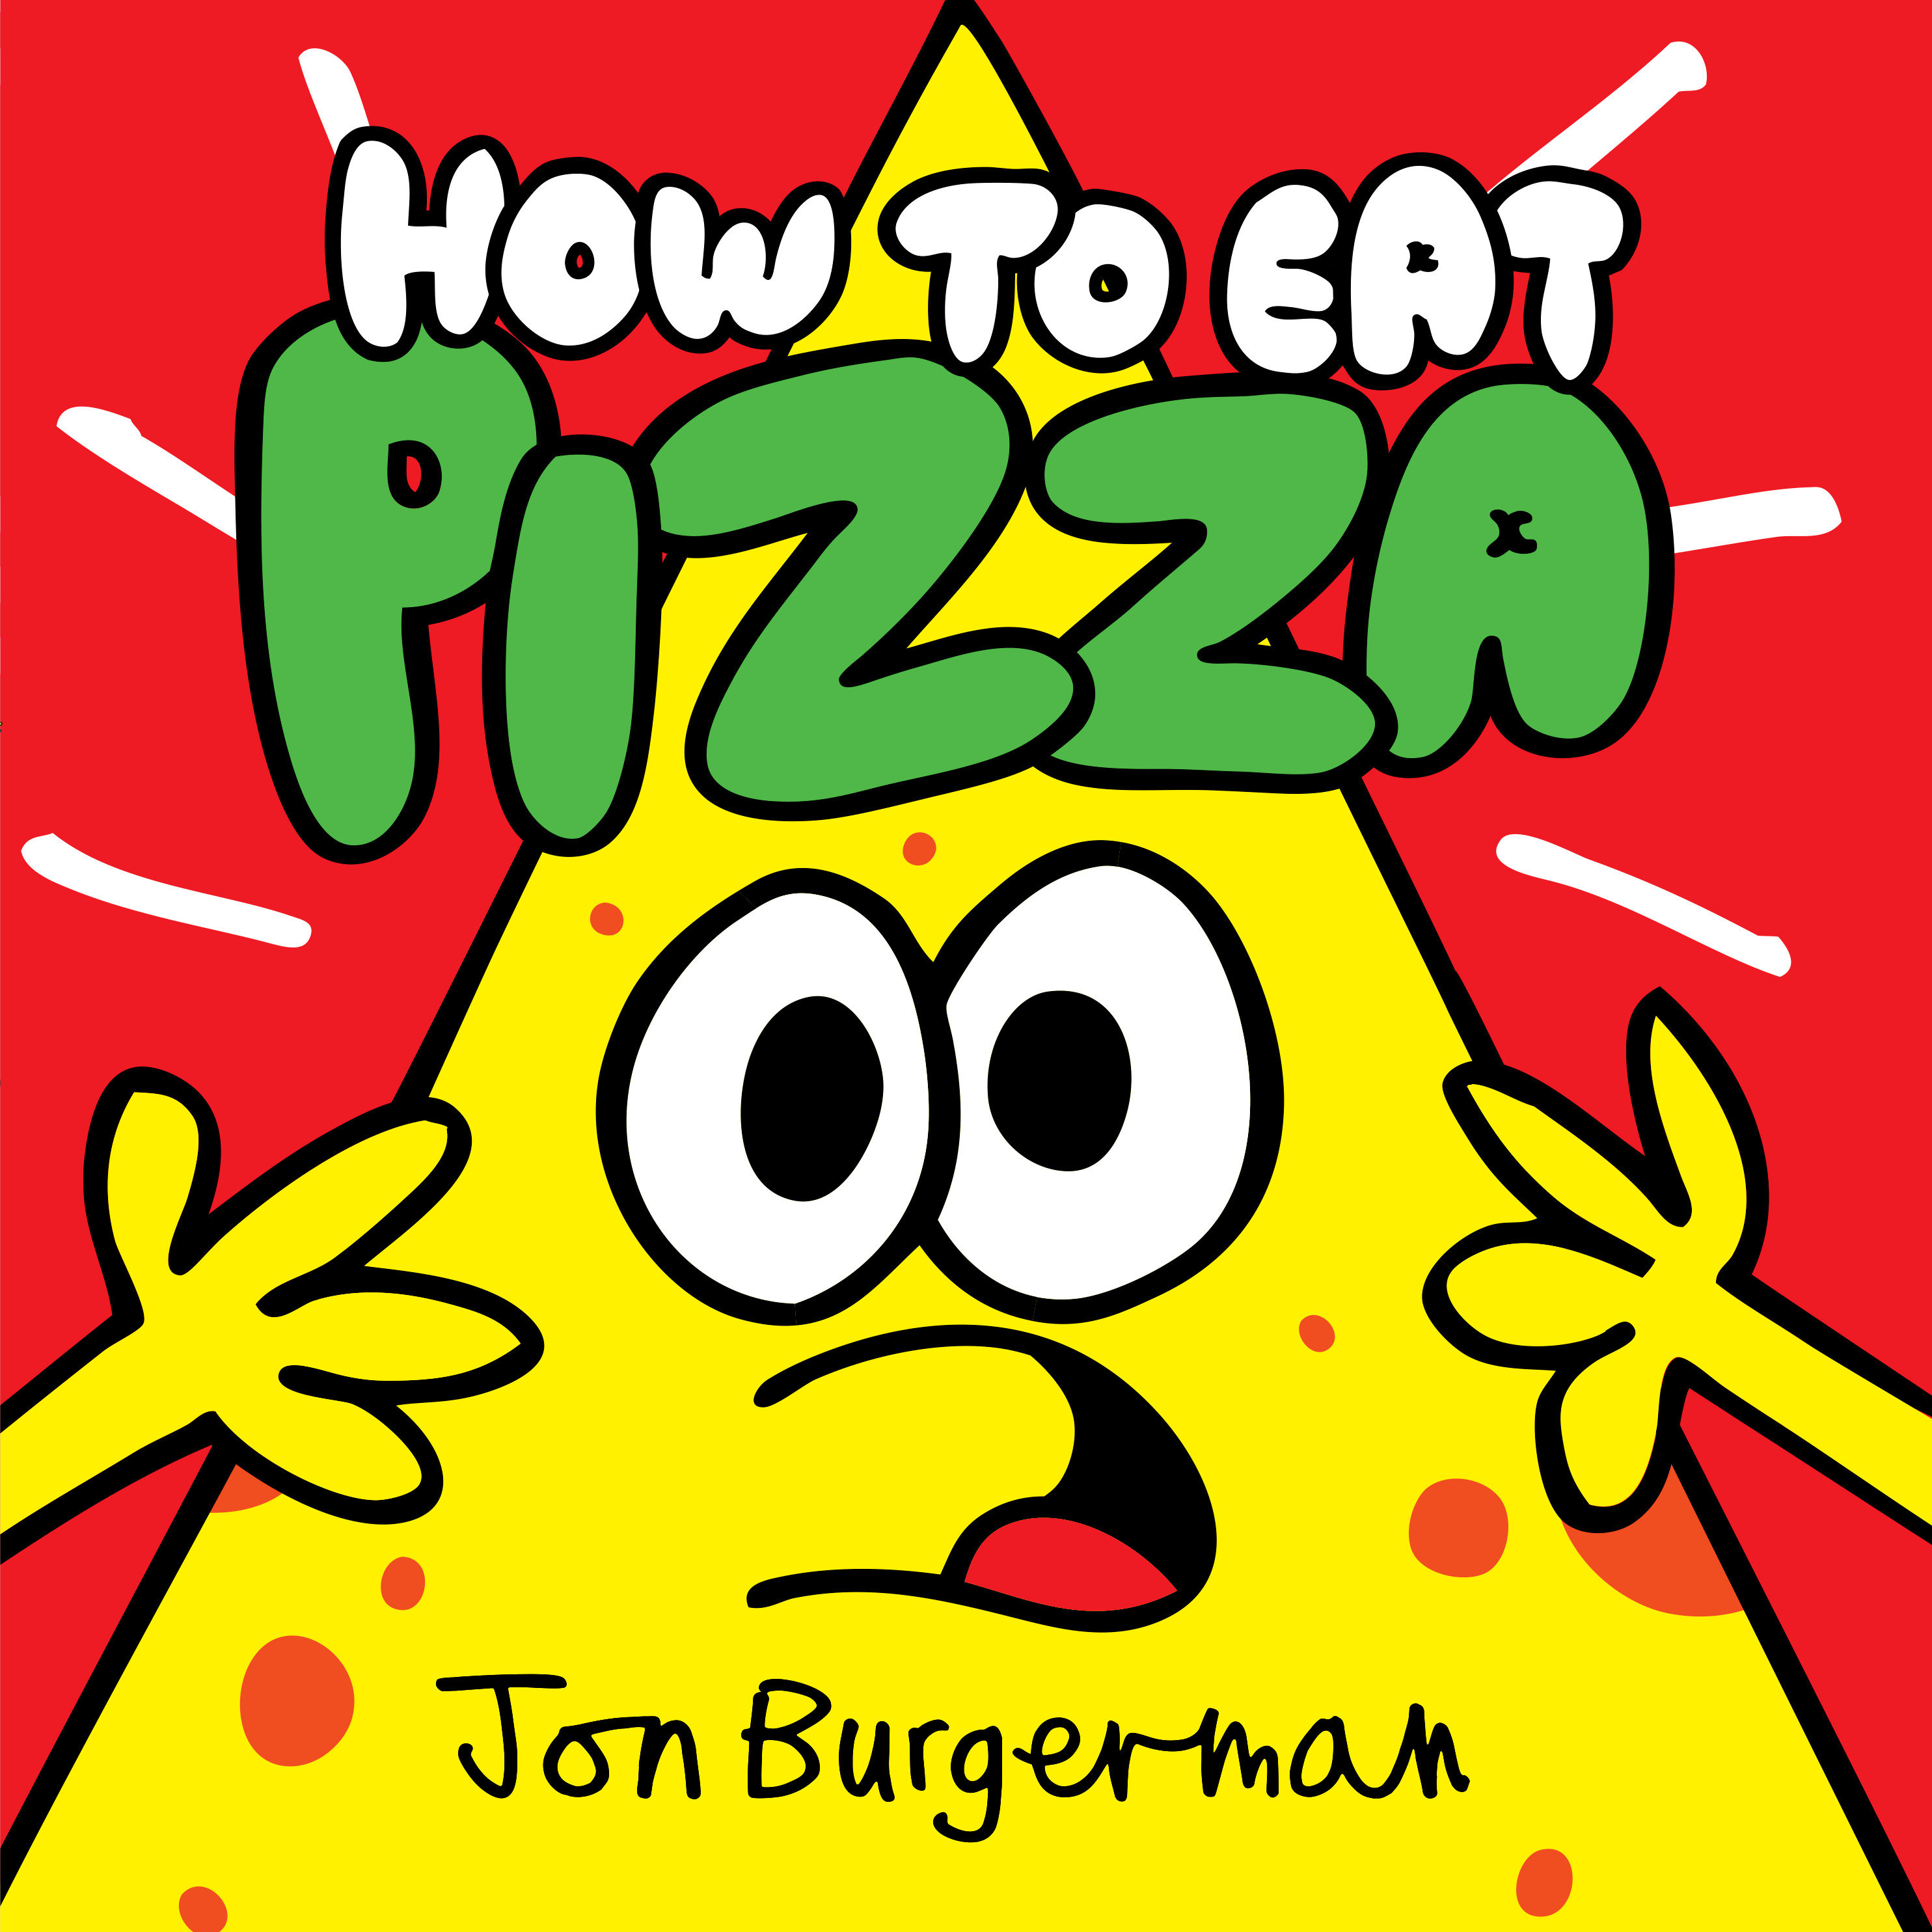 How To Eat Pizza (Hardcover Book)